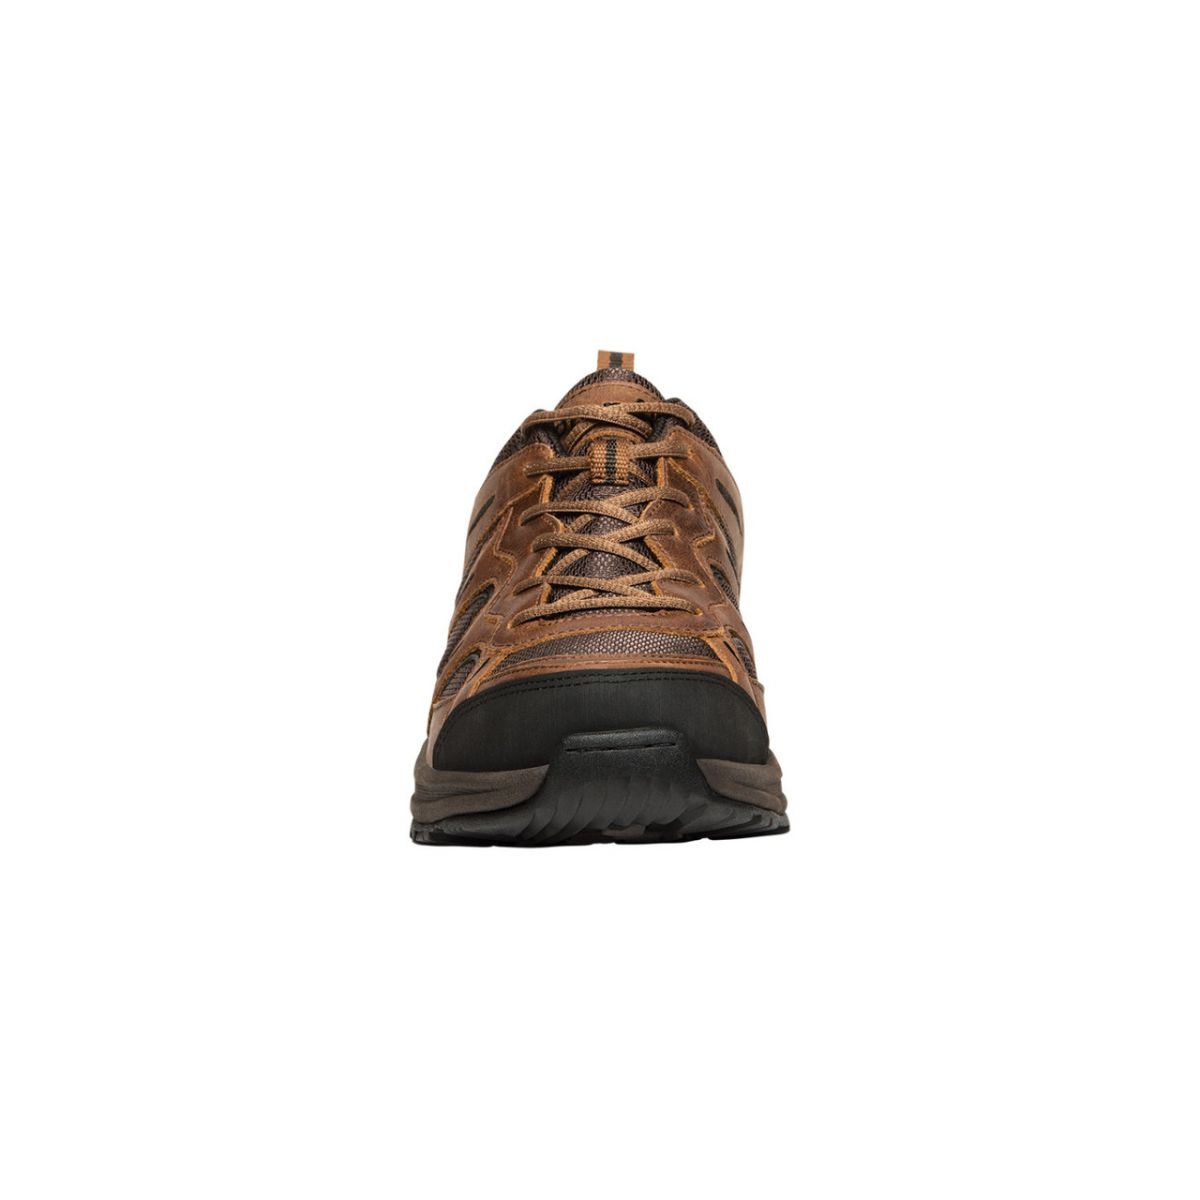 Propet Men's Connelly Hiking Shoe Brown - M5503BR BROWN - BROWN, 13-D